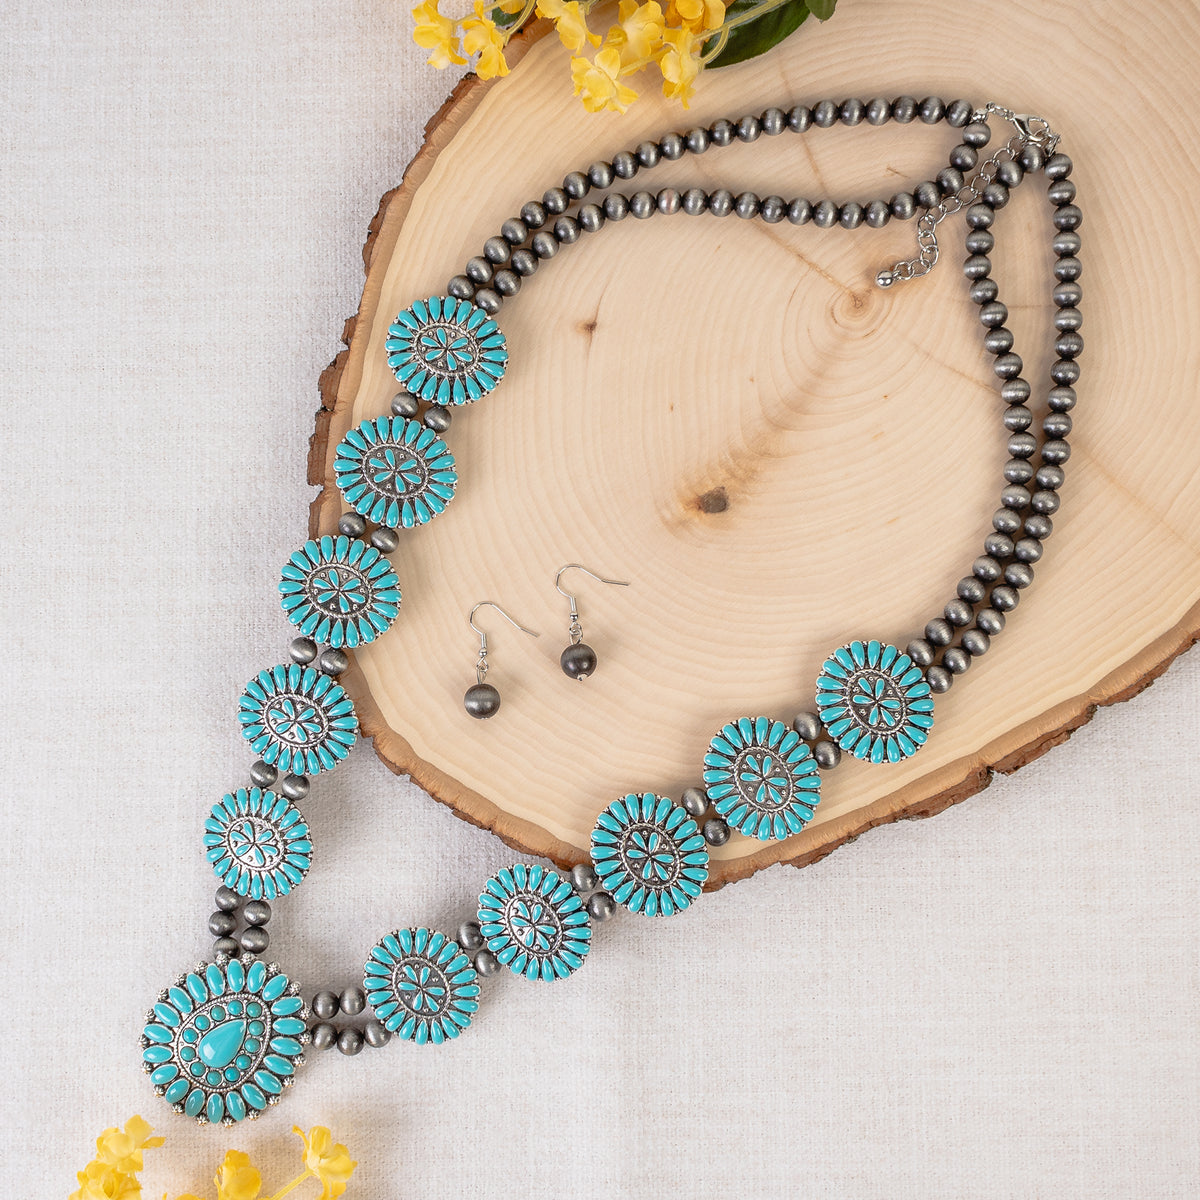 72965 - Squash Blossom Necklace - Turquoise & Silver